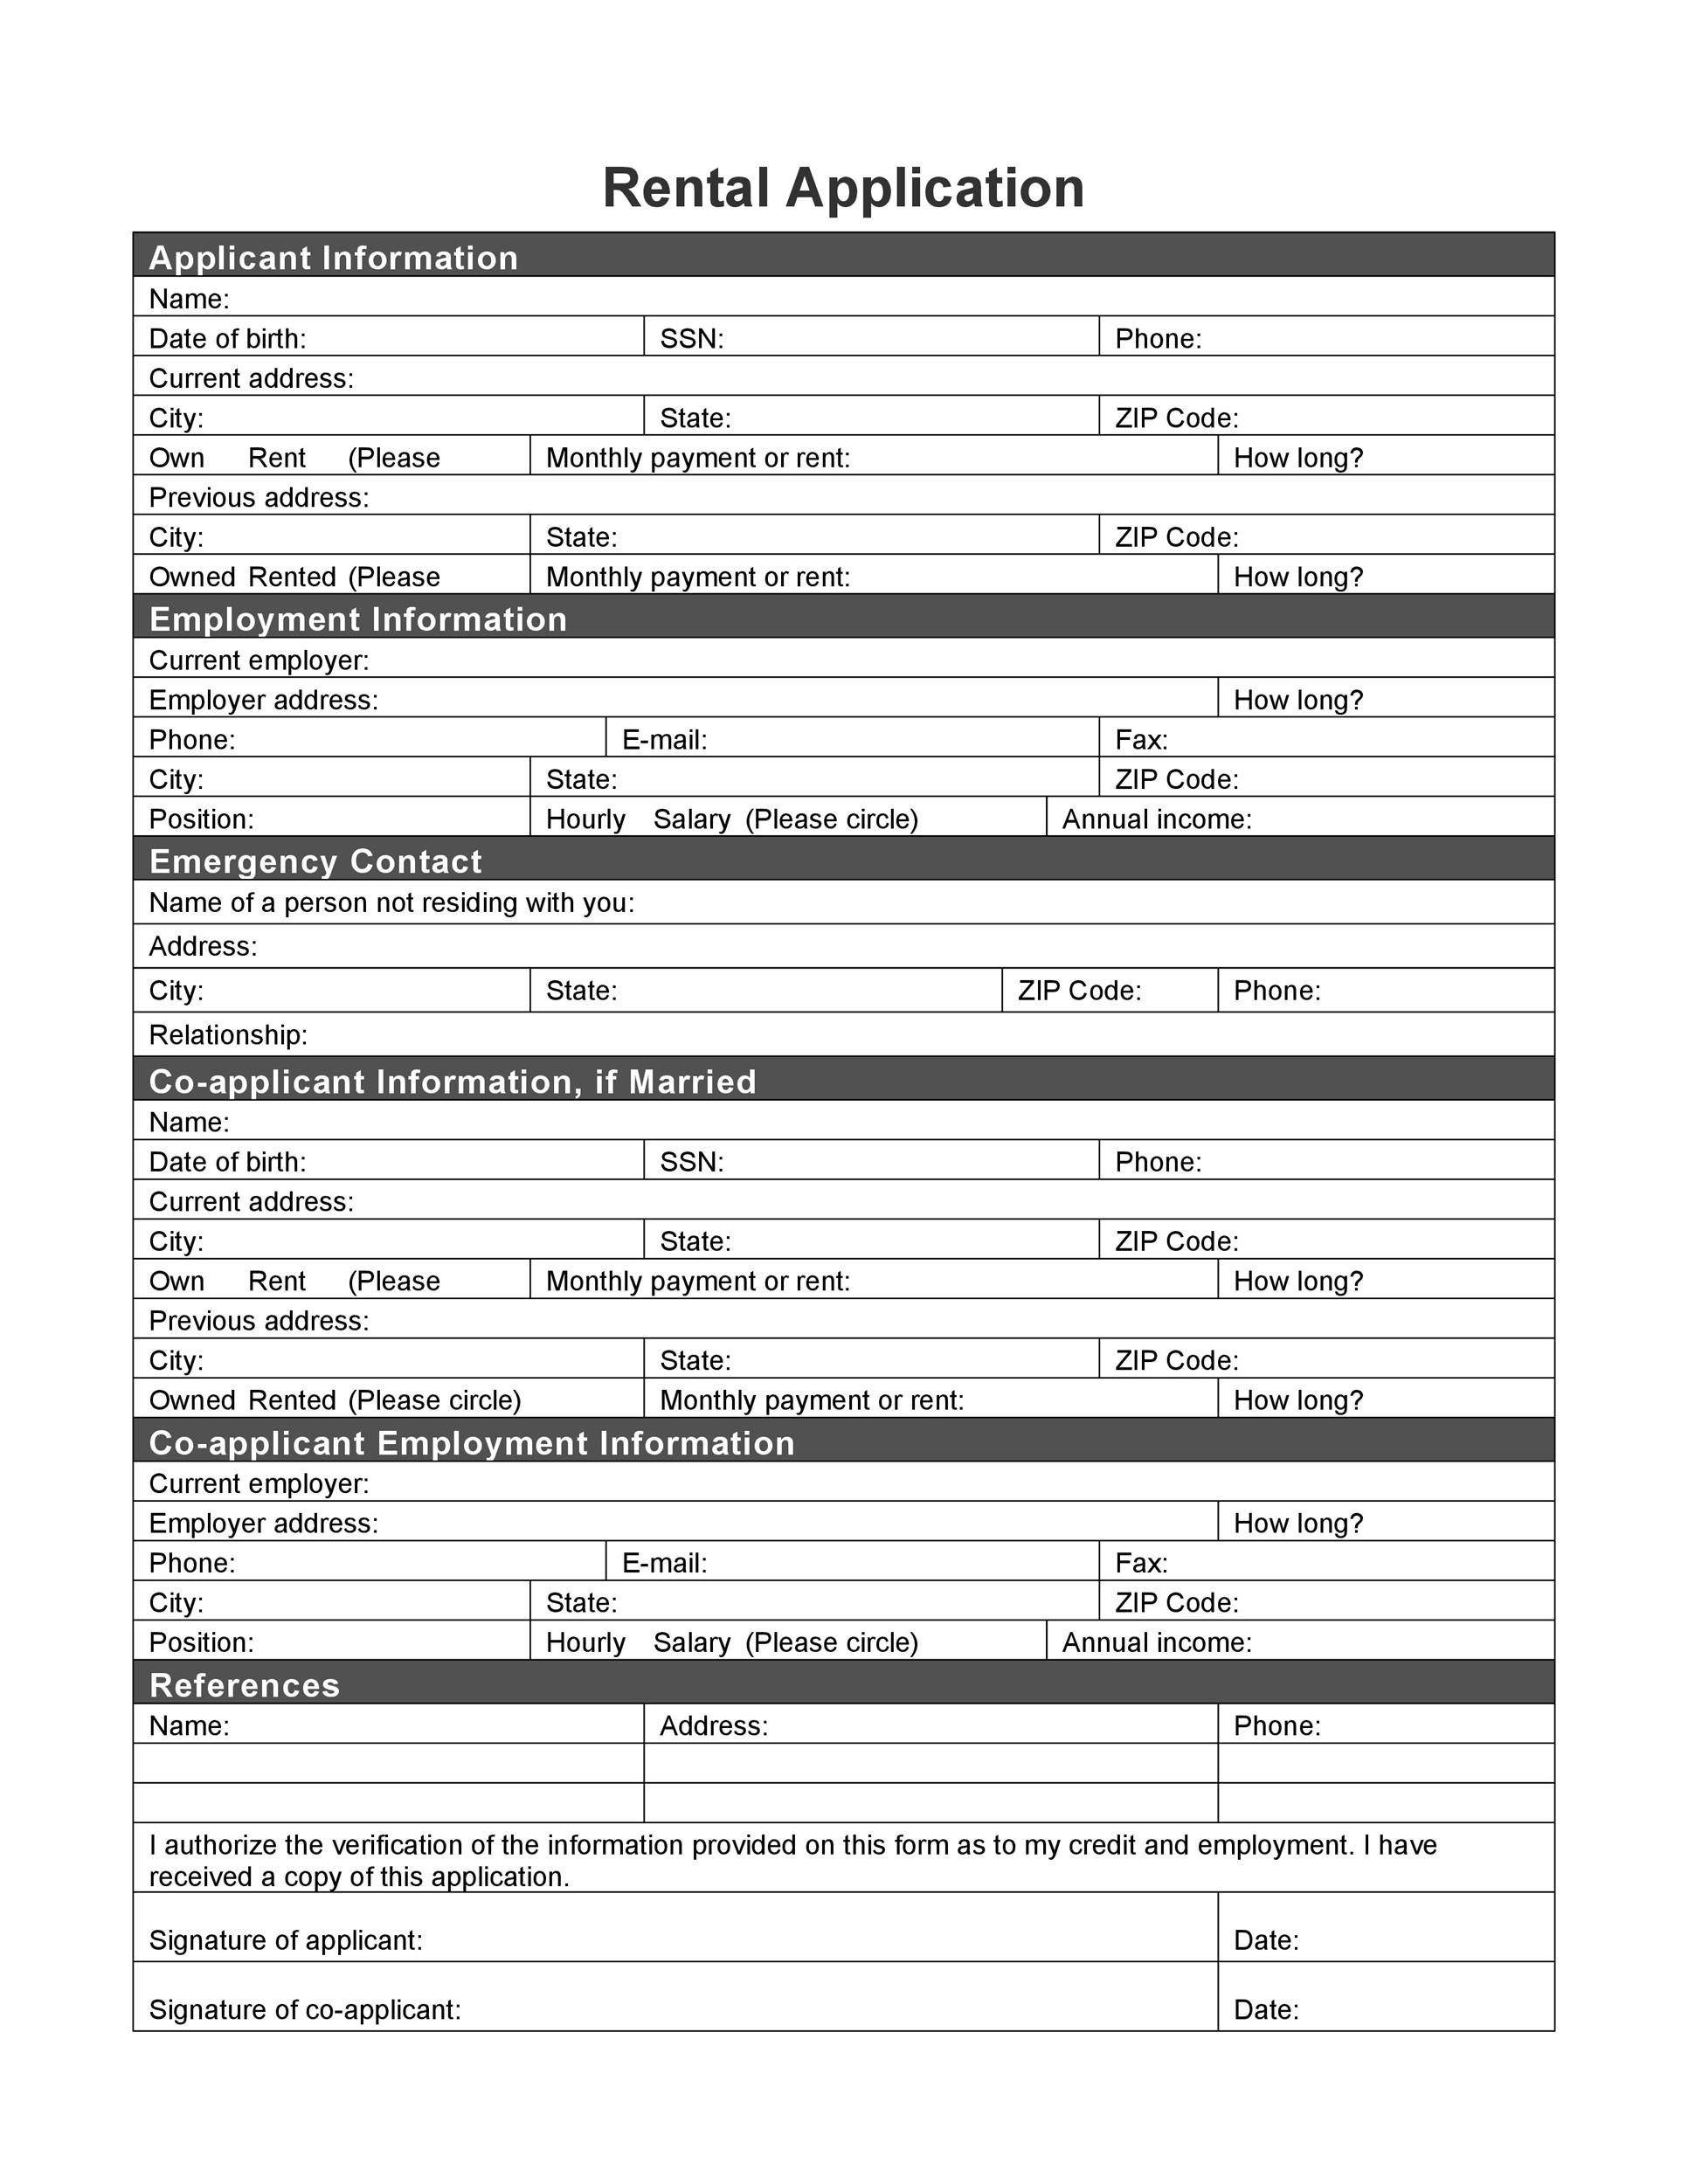 42 Rental Application Forms & Lease Agreement Templates